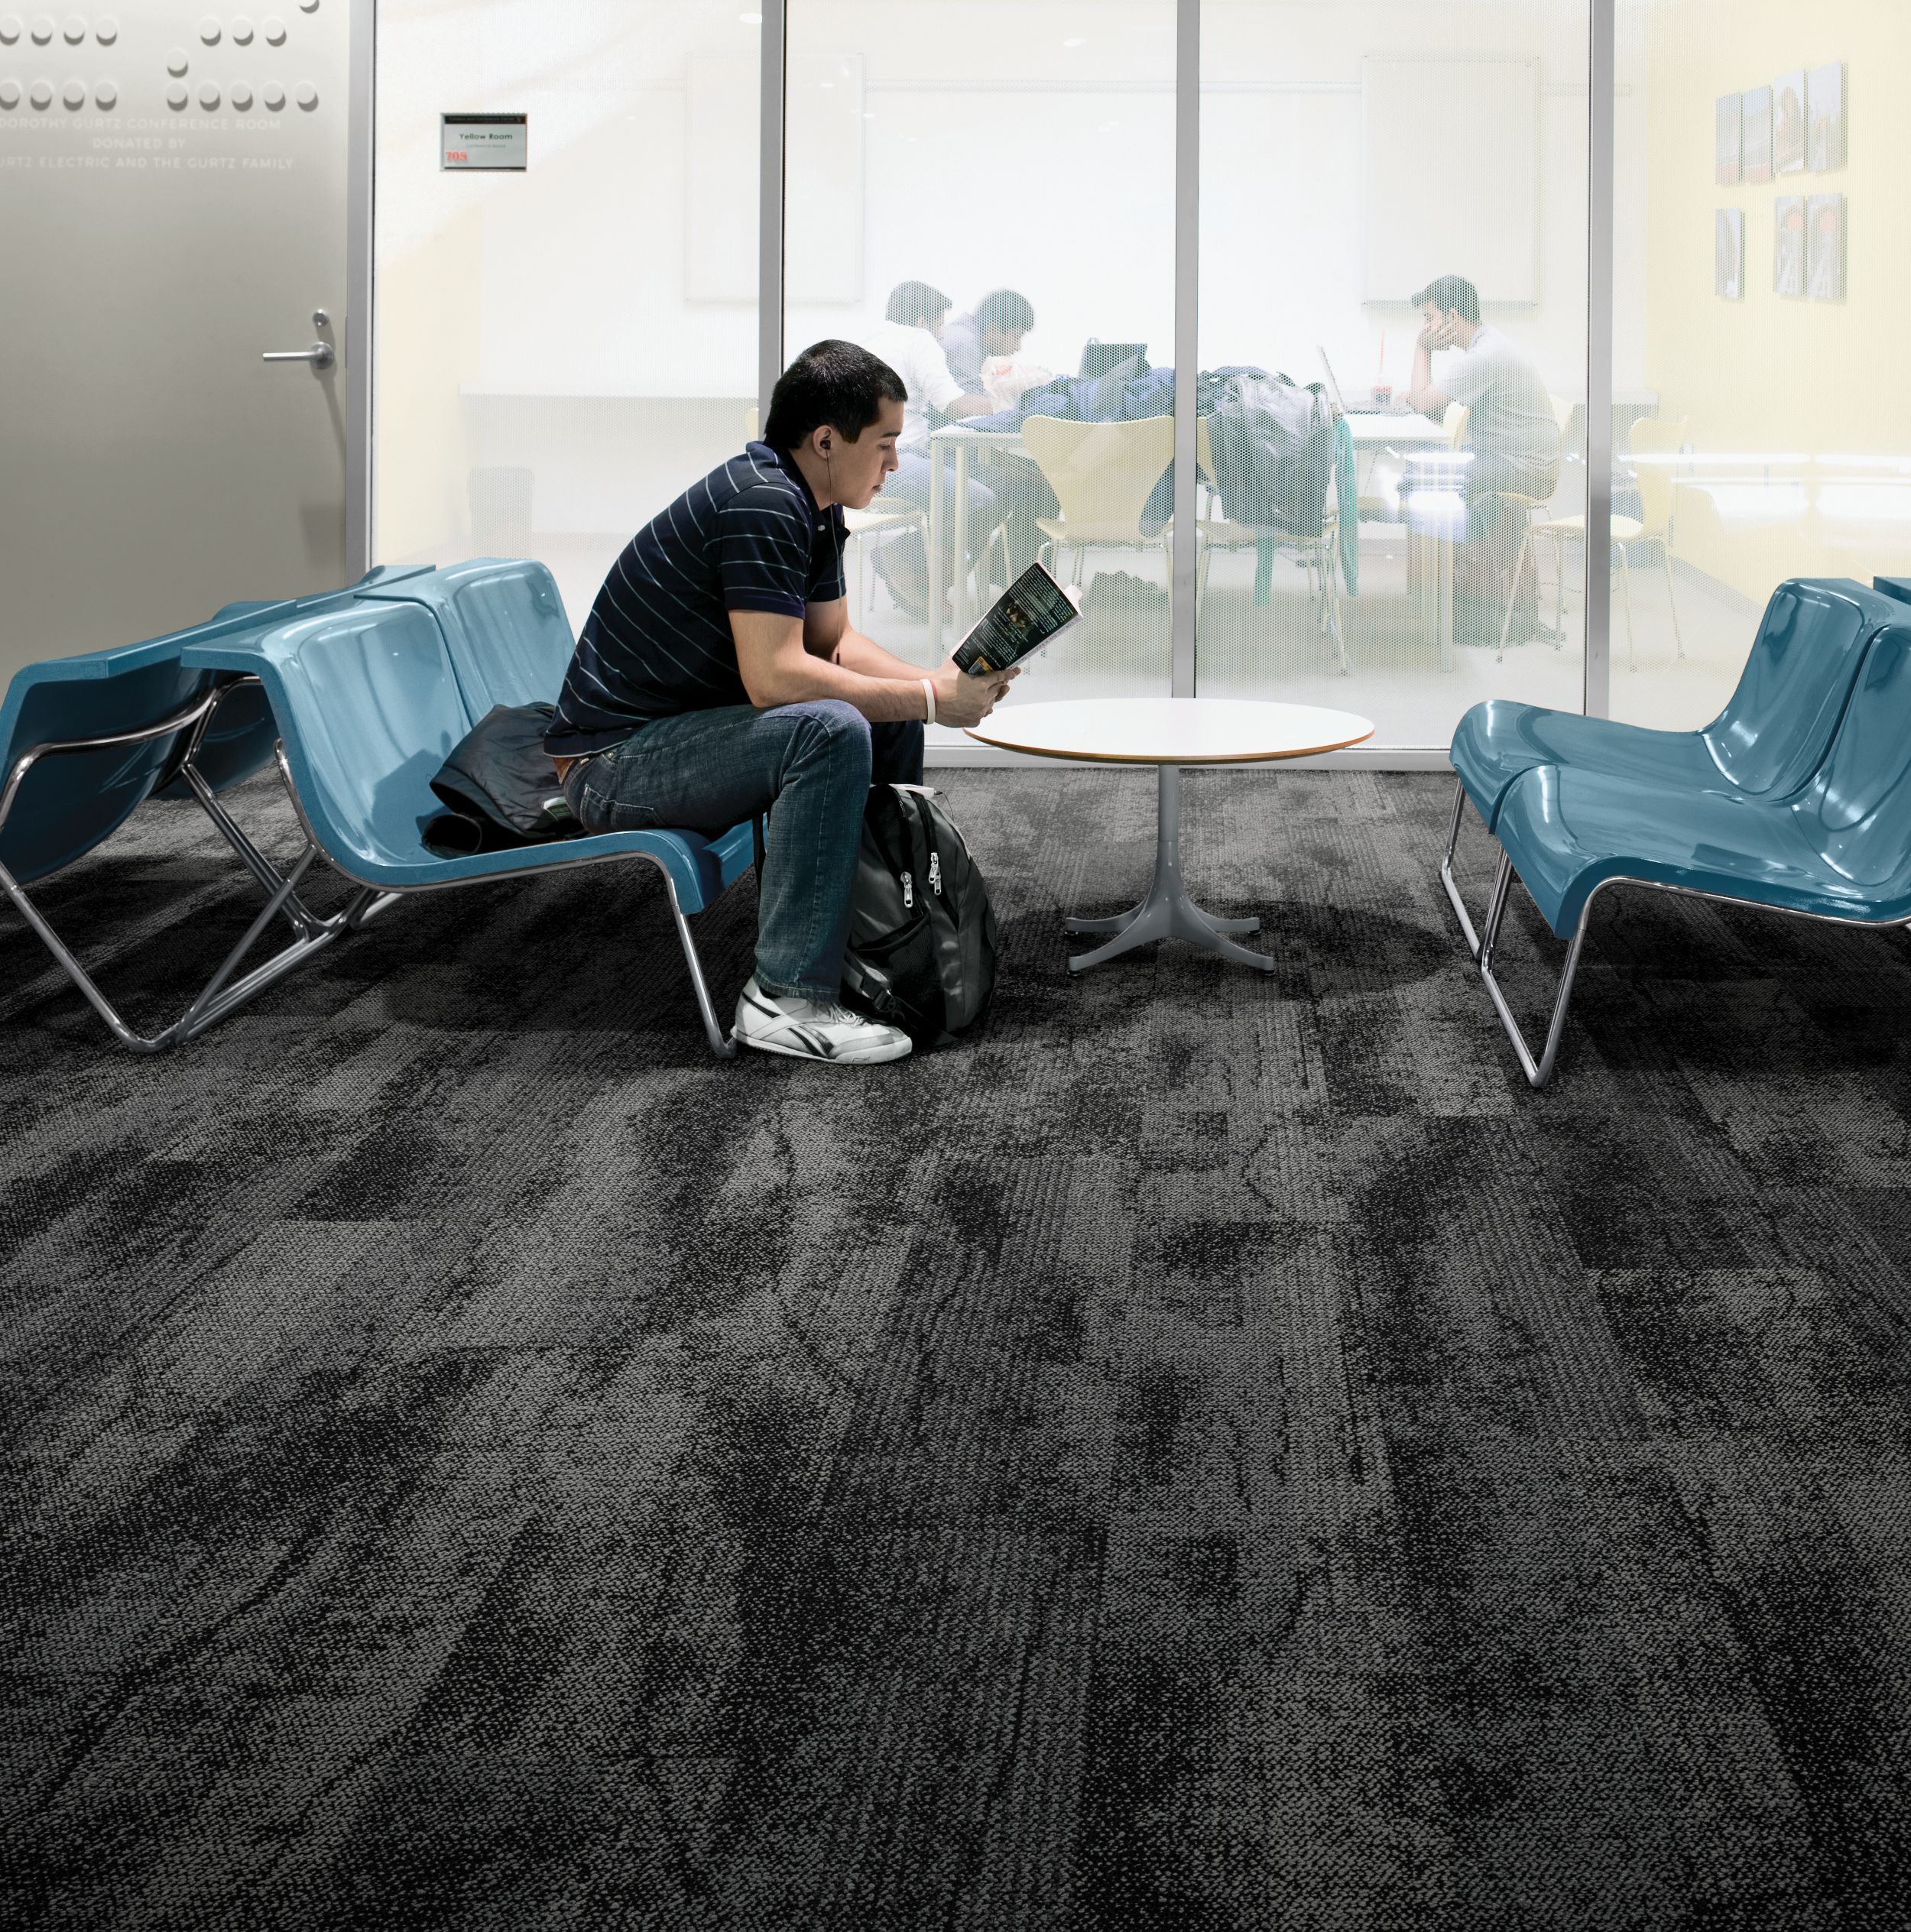 Interface Neighborhood Smooth plank carpet tile in public education space with man reading a book on blue chair numéro d’image 2